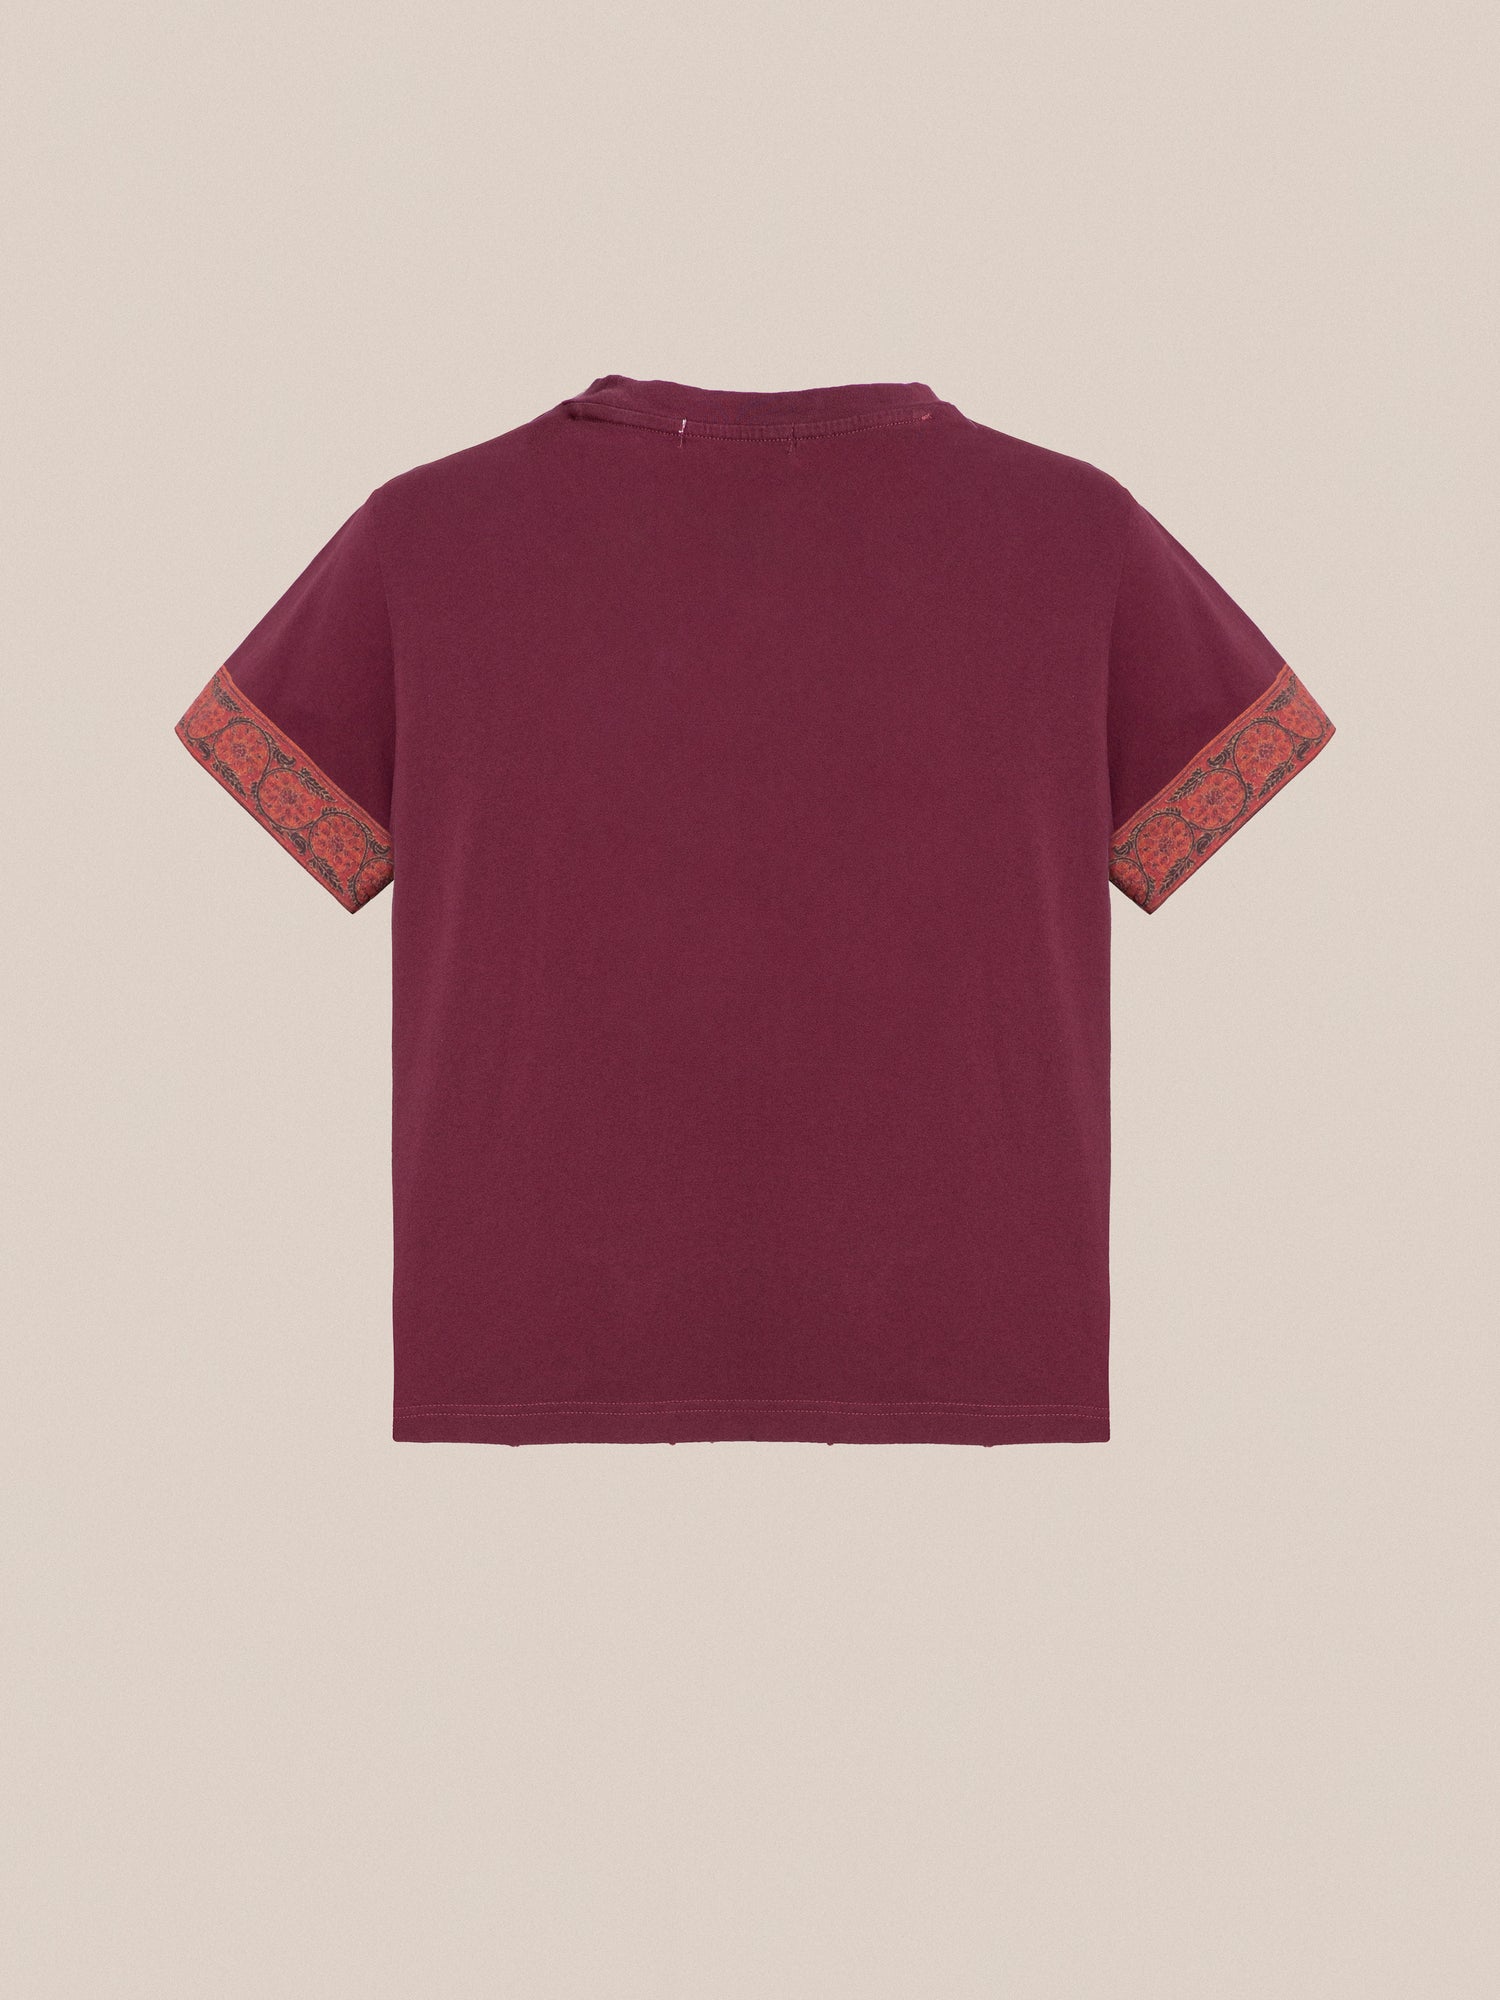 A burgundy Horse Embellishment Tee with an orange trim and floral motifs embellishment by Found.